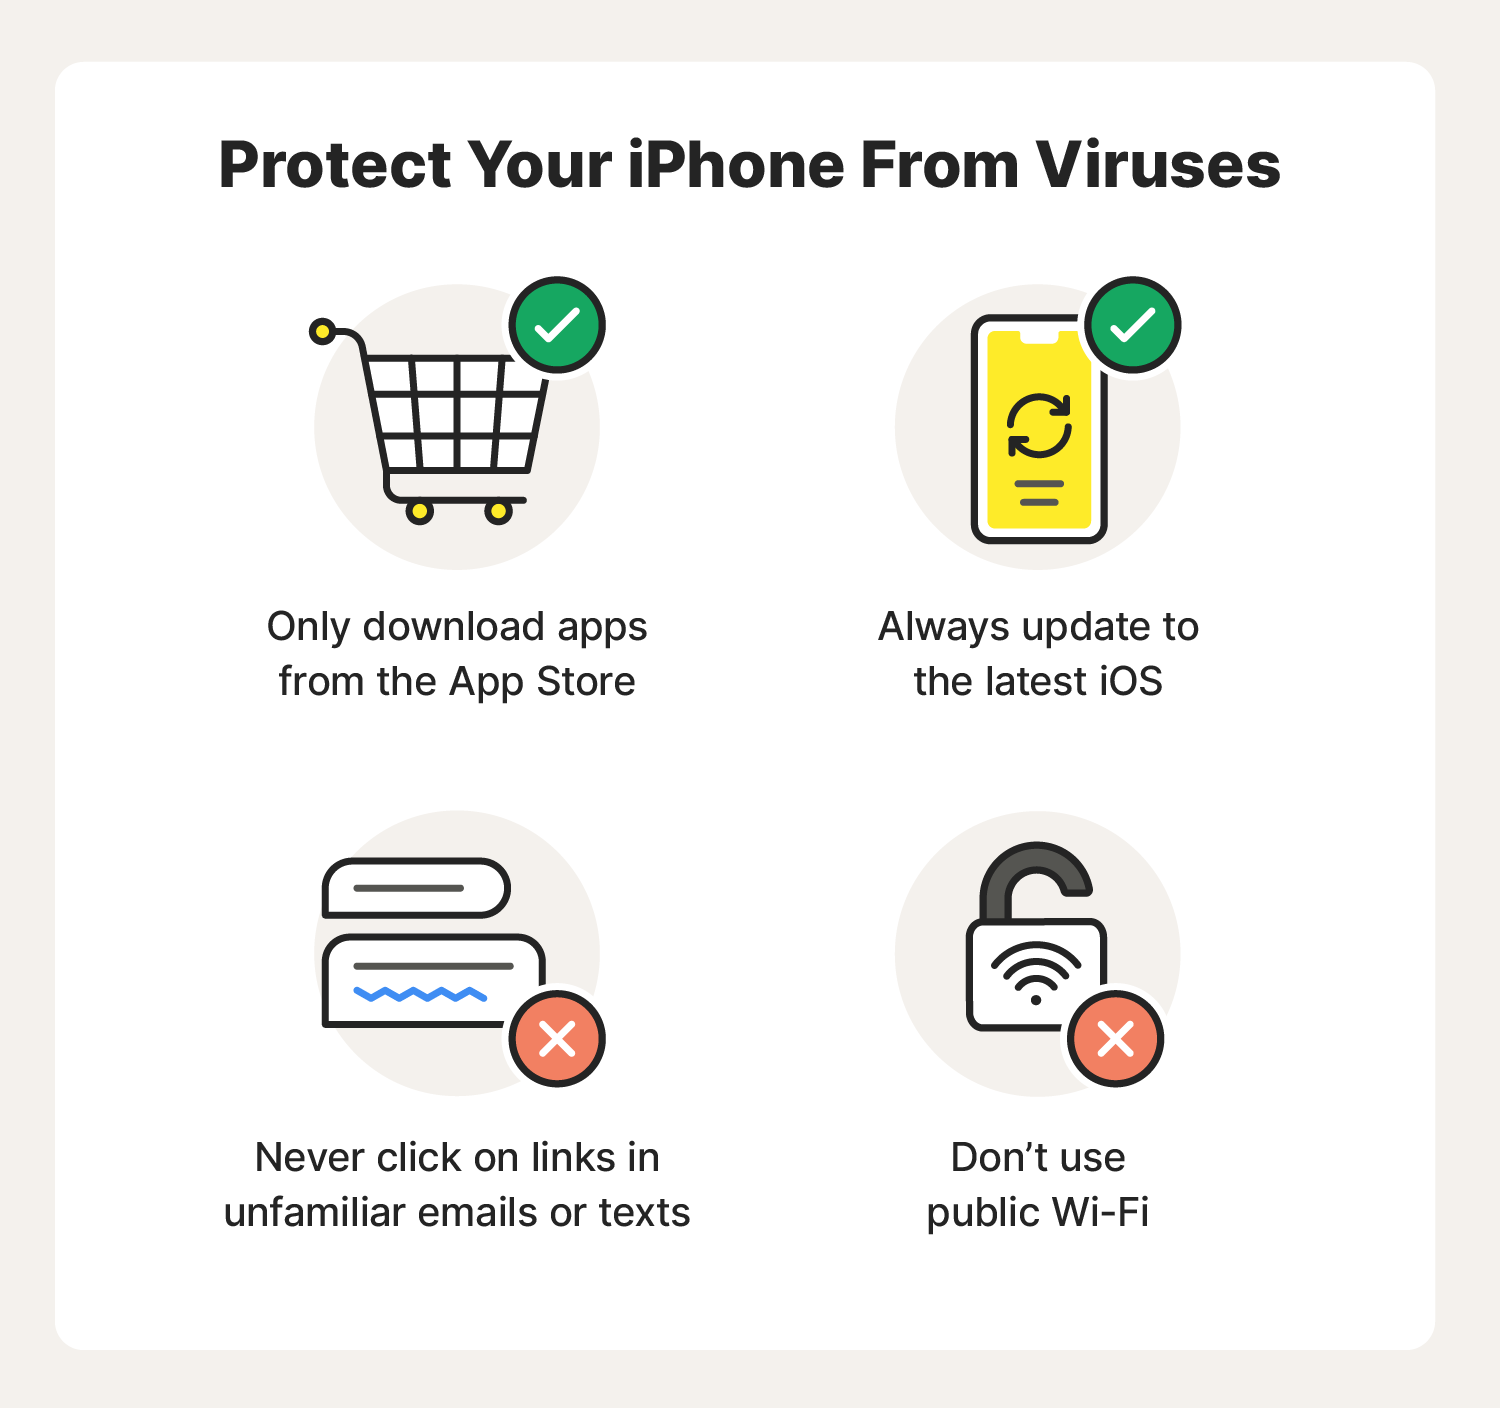 An image covers strategies to protect your iPhone from viruses.